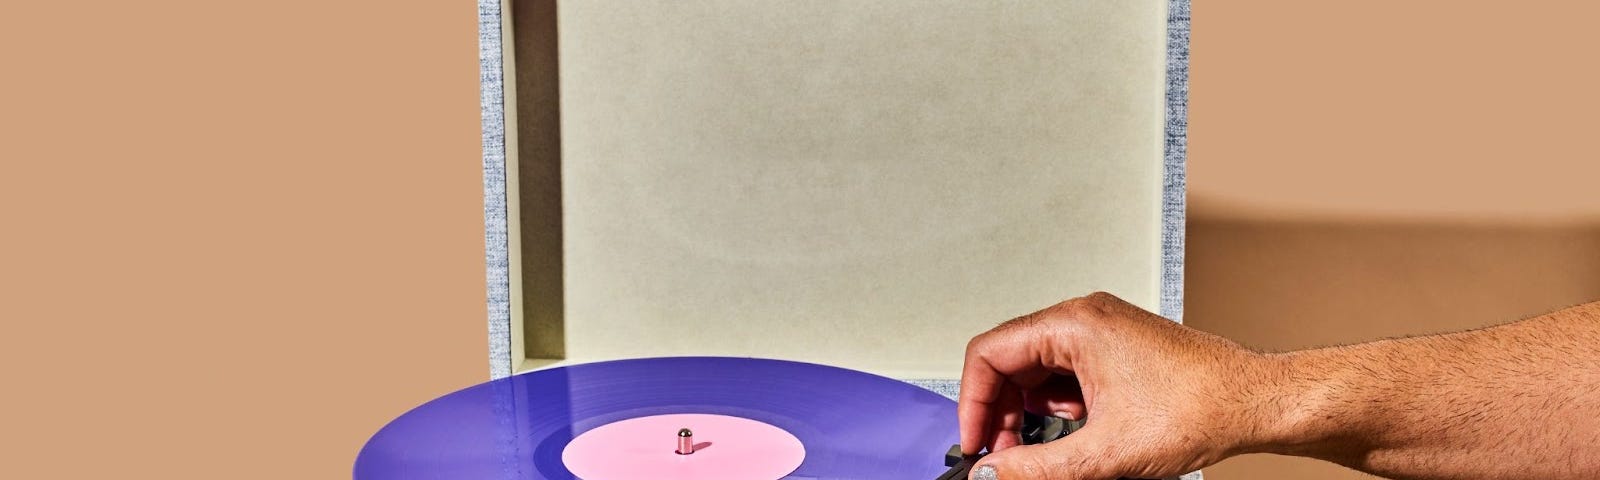 A hand putting a record player needle on a purple vinyl record